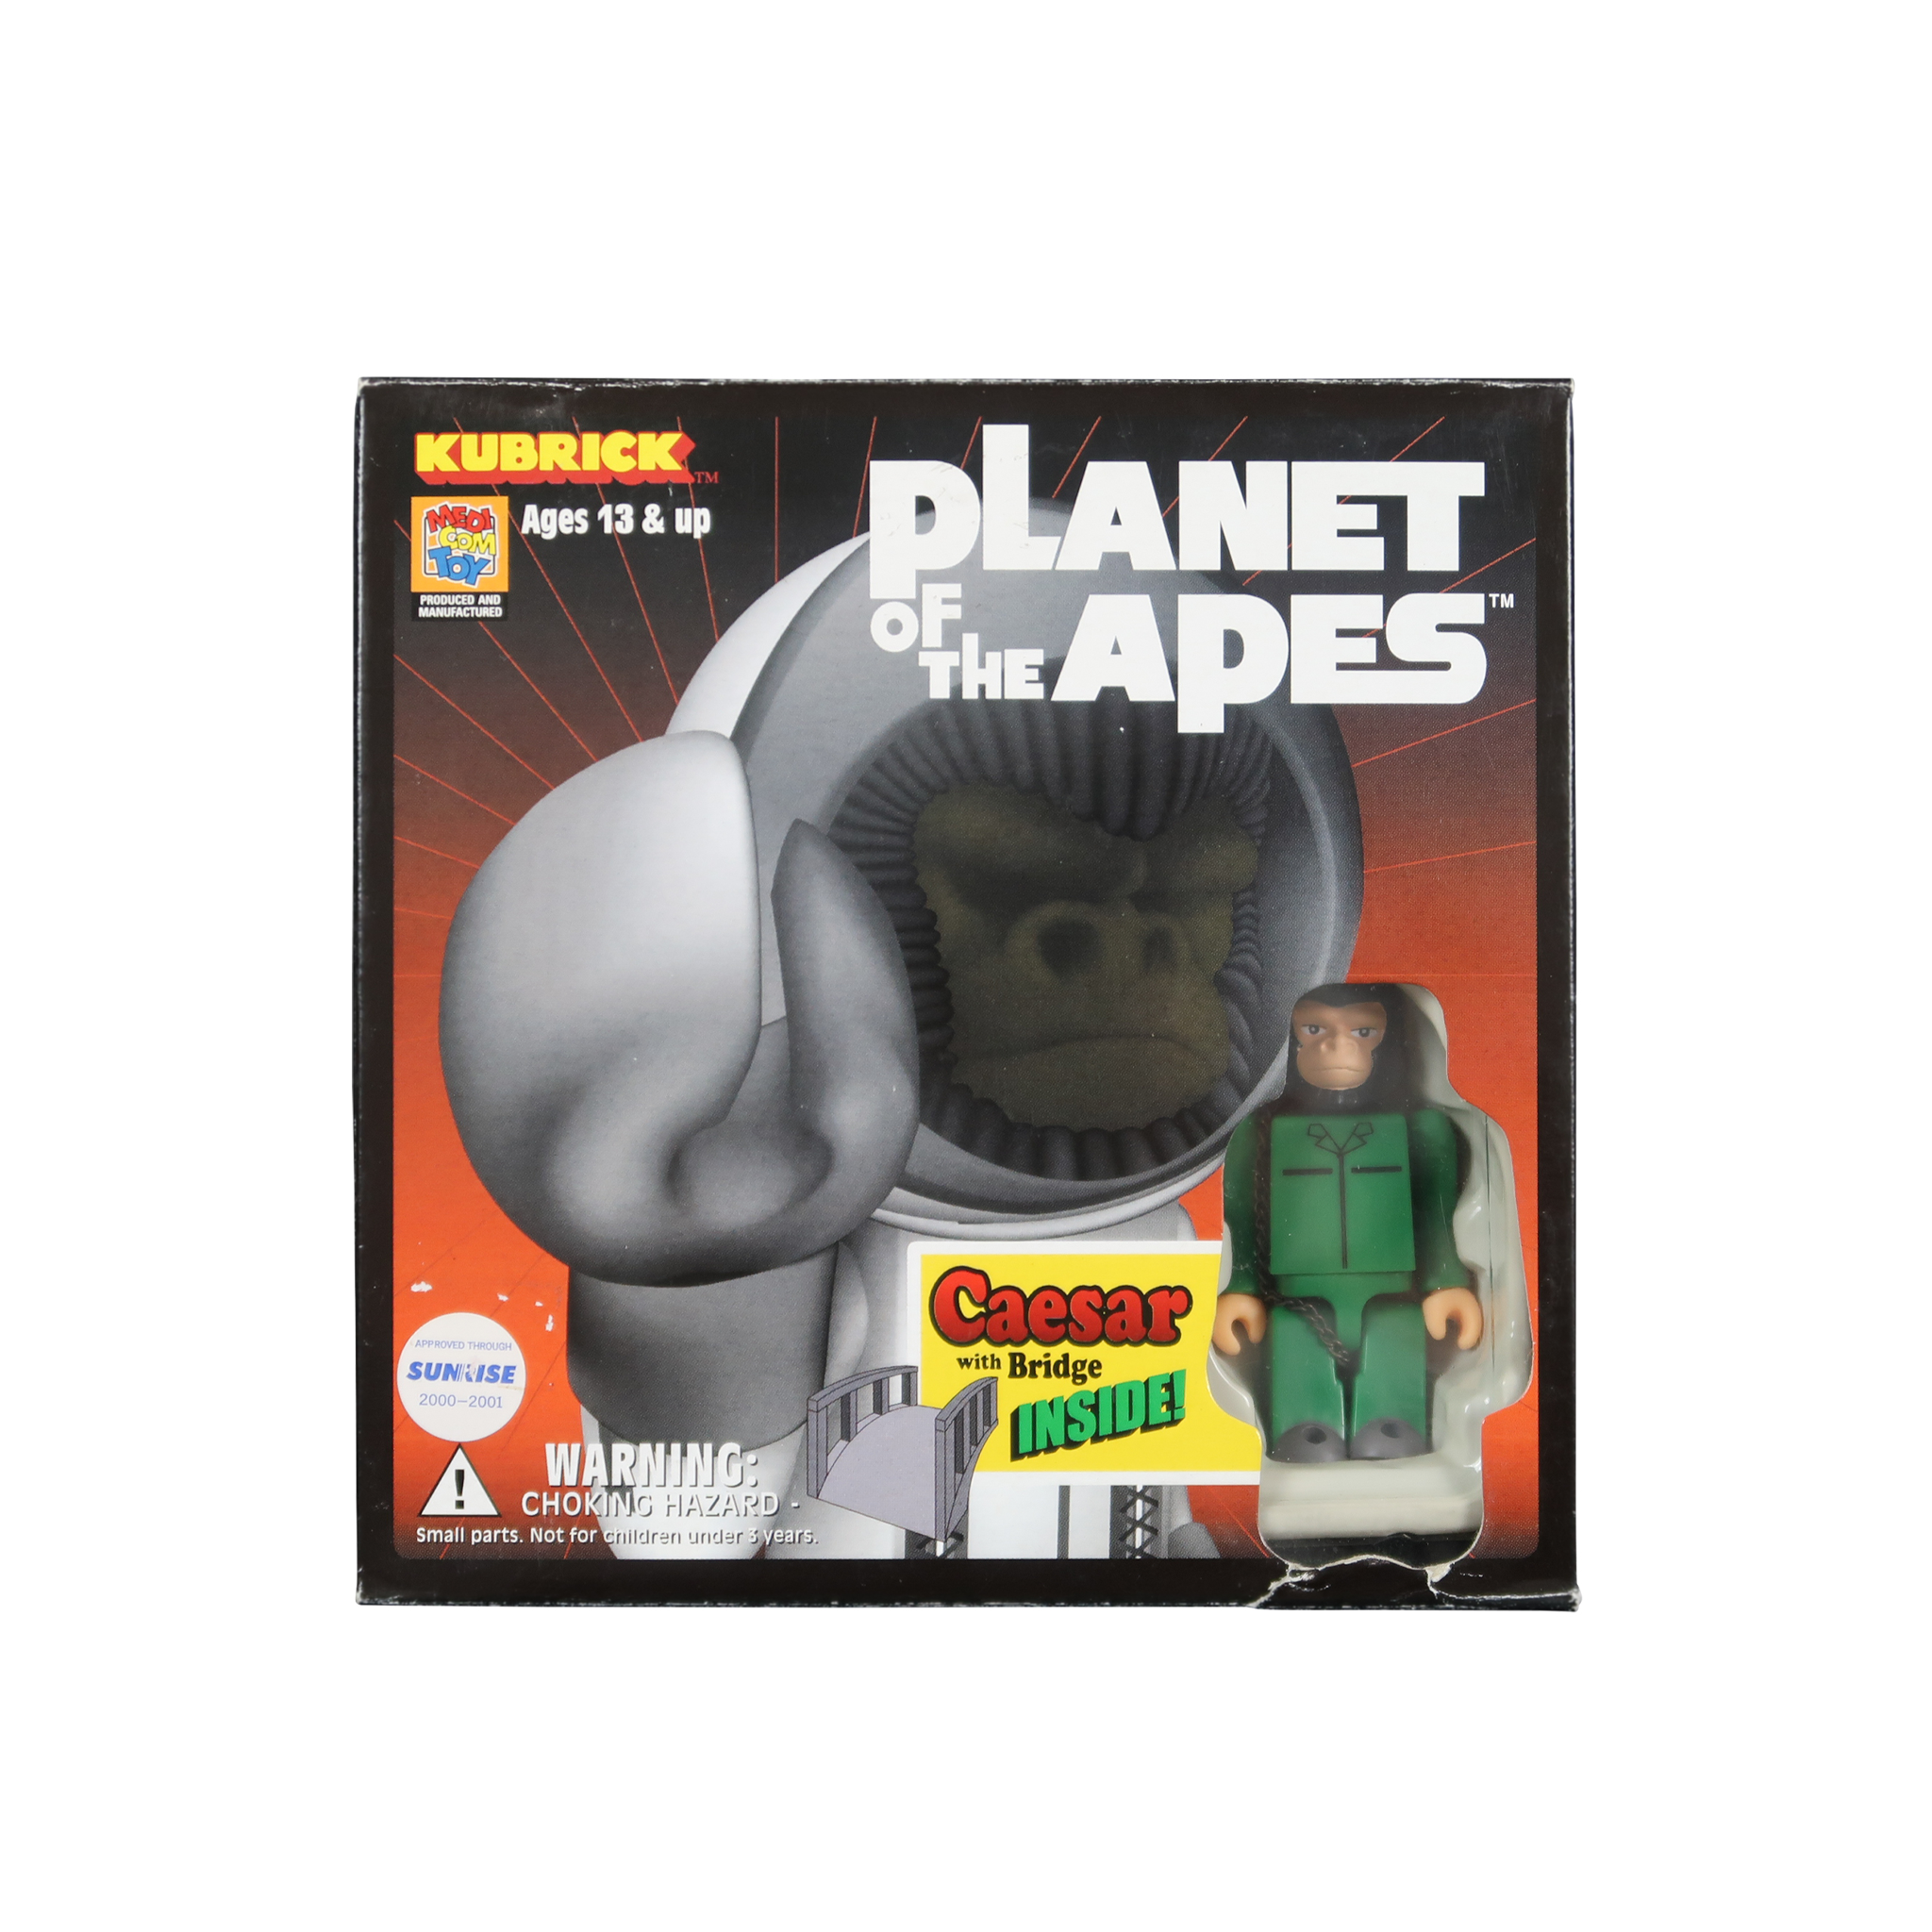 Planet of the Apes "Caesar" – Kubrick (2000)